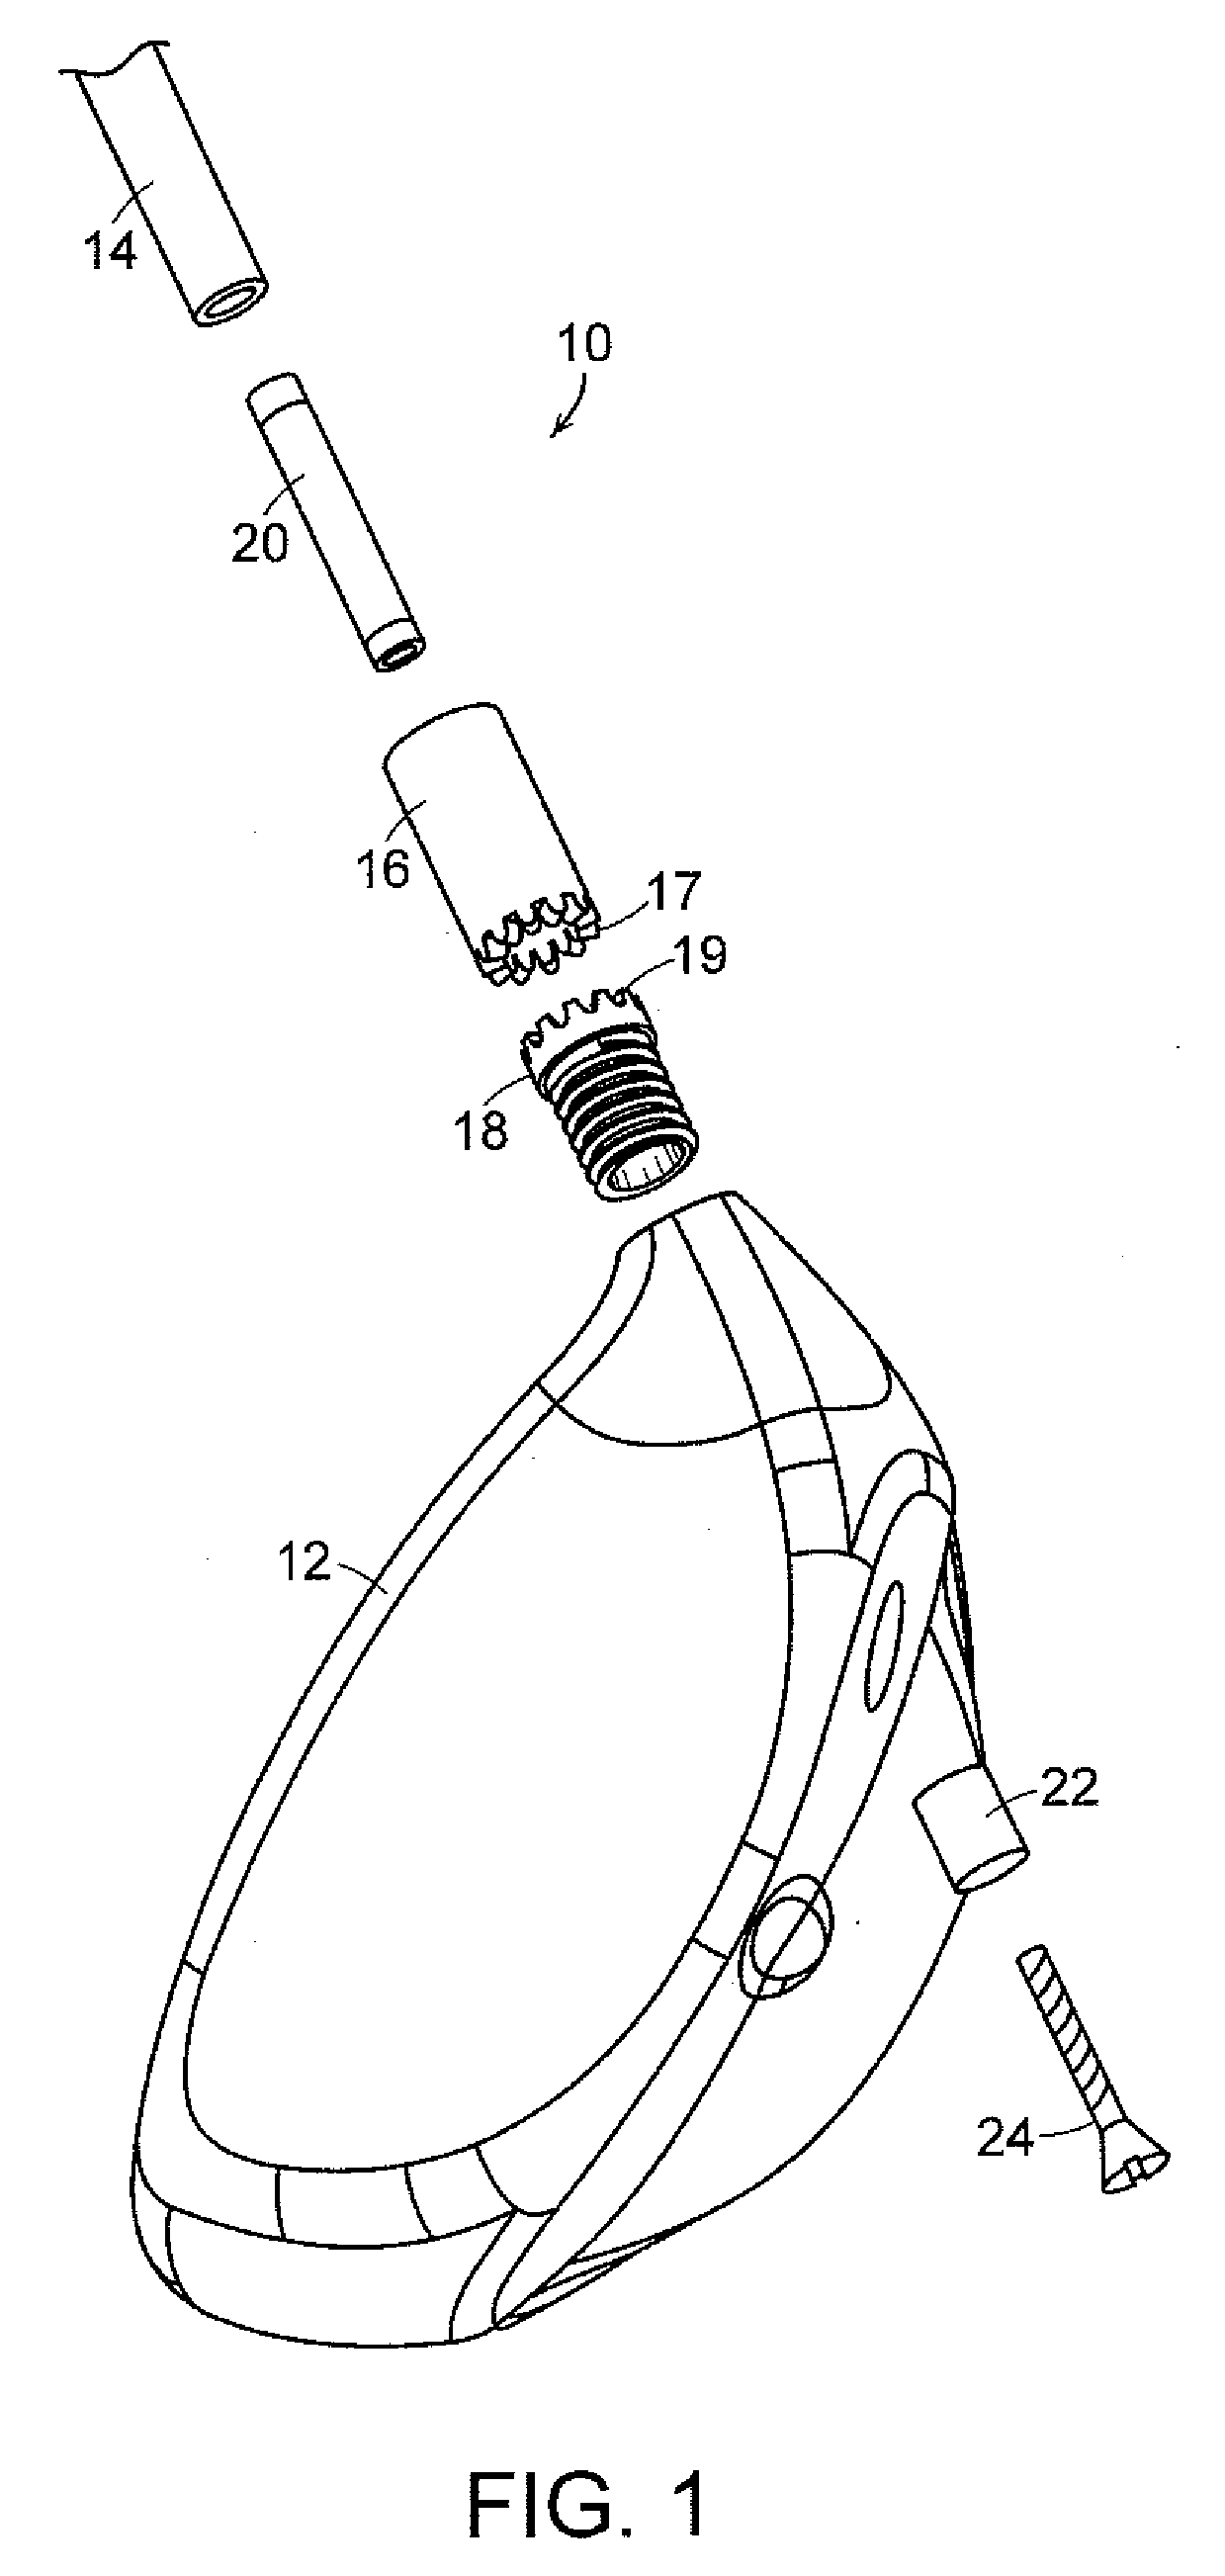 Two-part hosel connection system for golf clubs